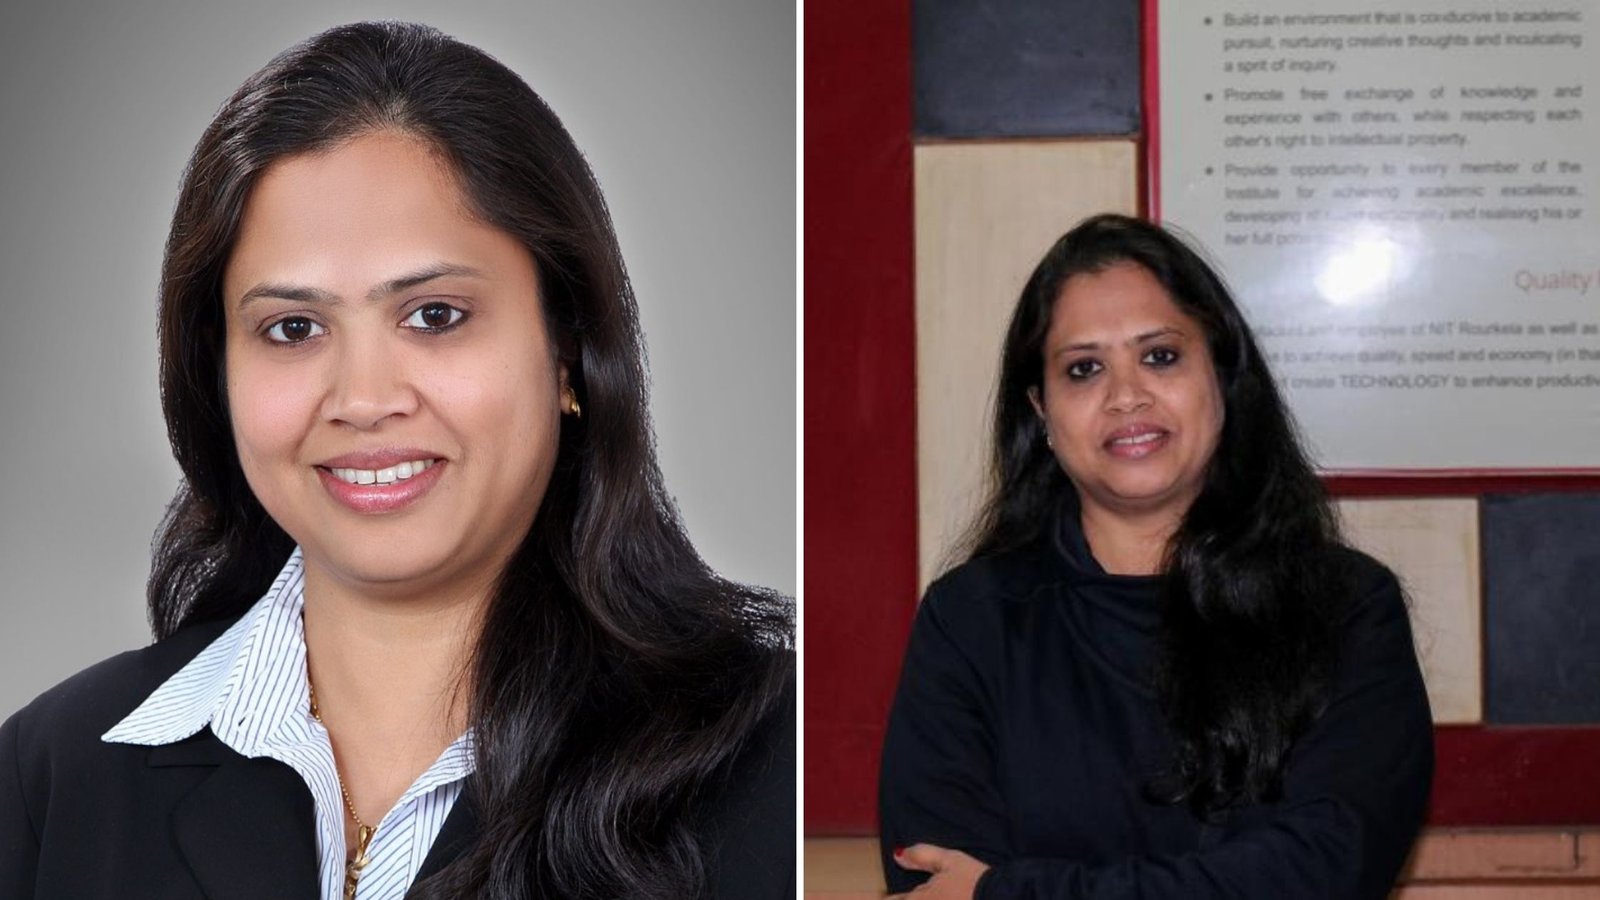 Prativa Mohapatra Becomes Adobe India's First Female Vice President And Managing Director.